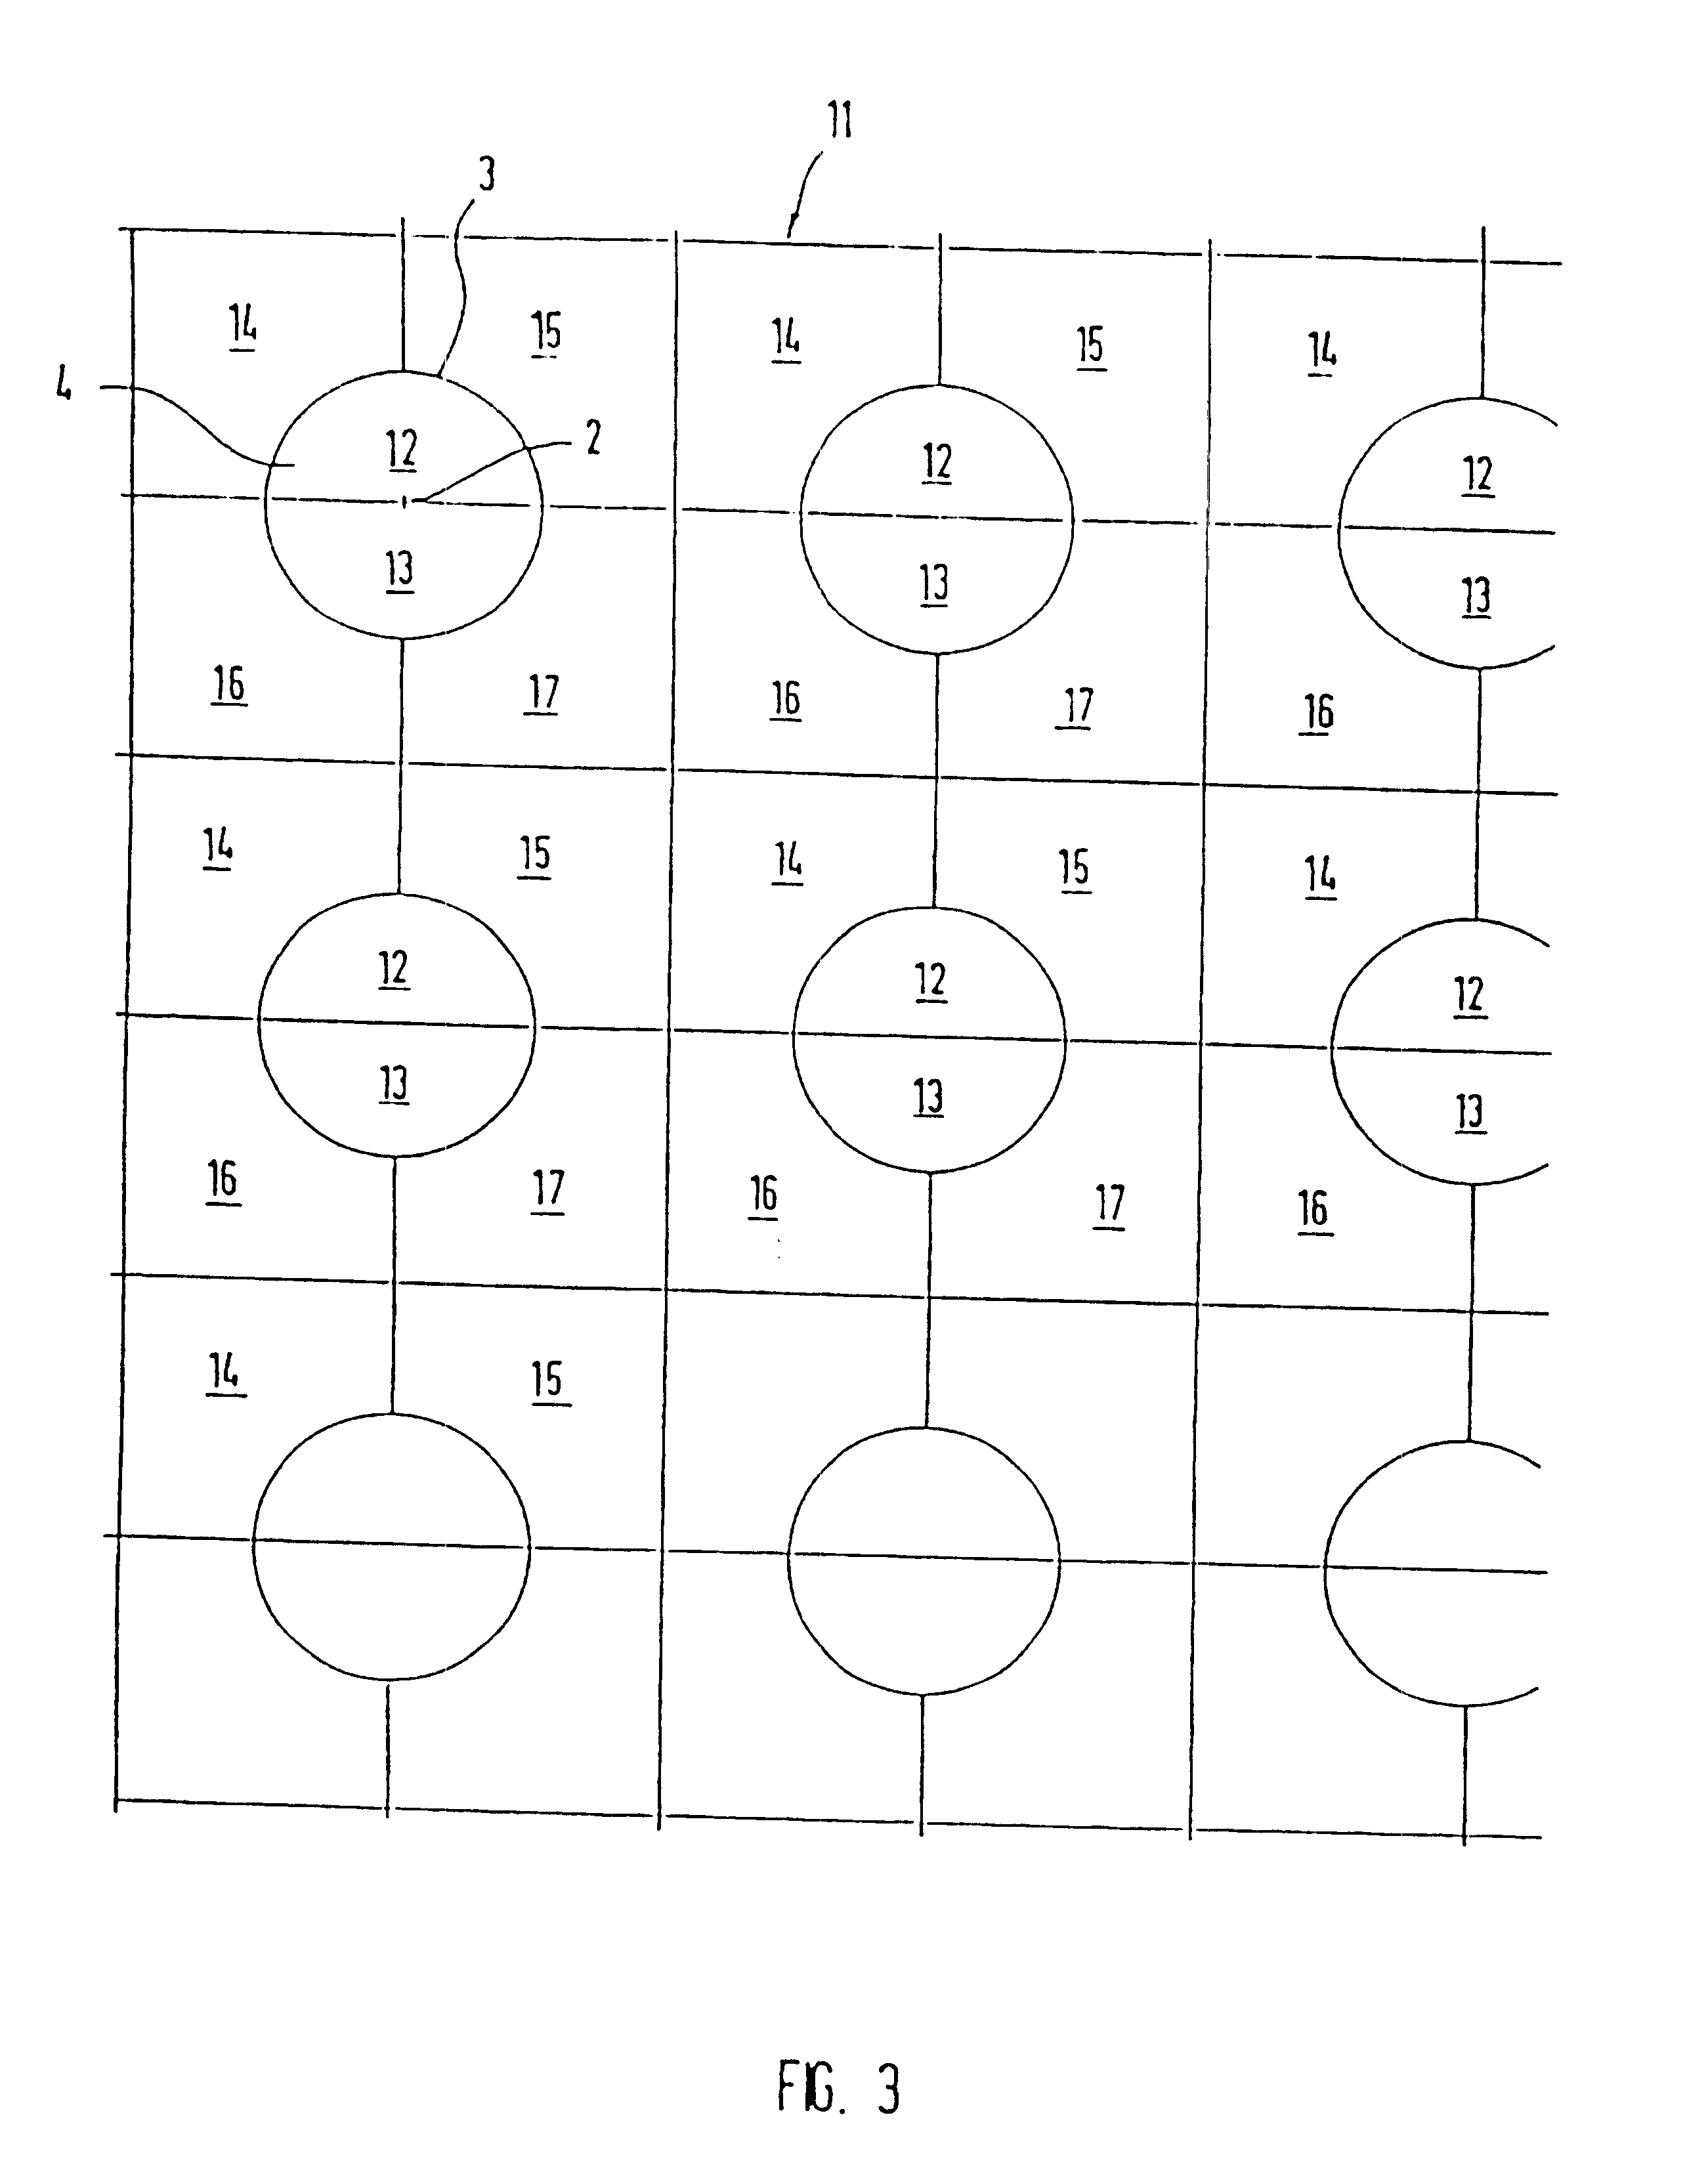 Arrangements of base transceiver stations of an area-covering network